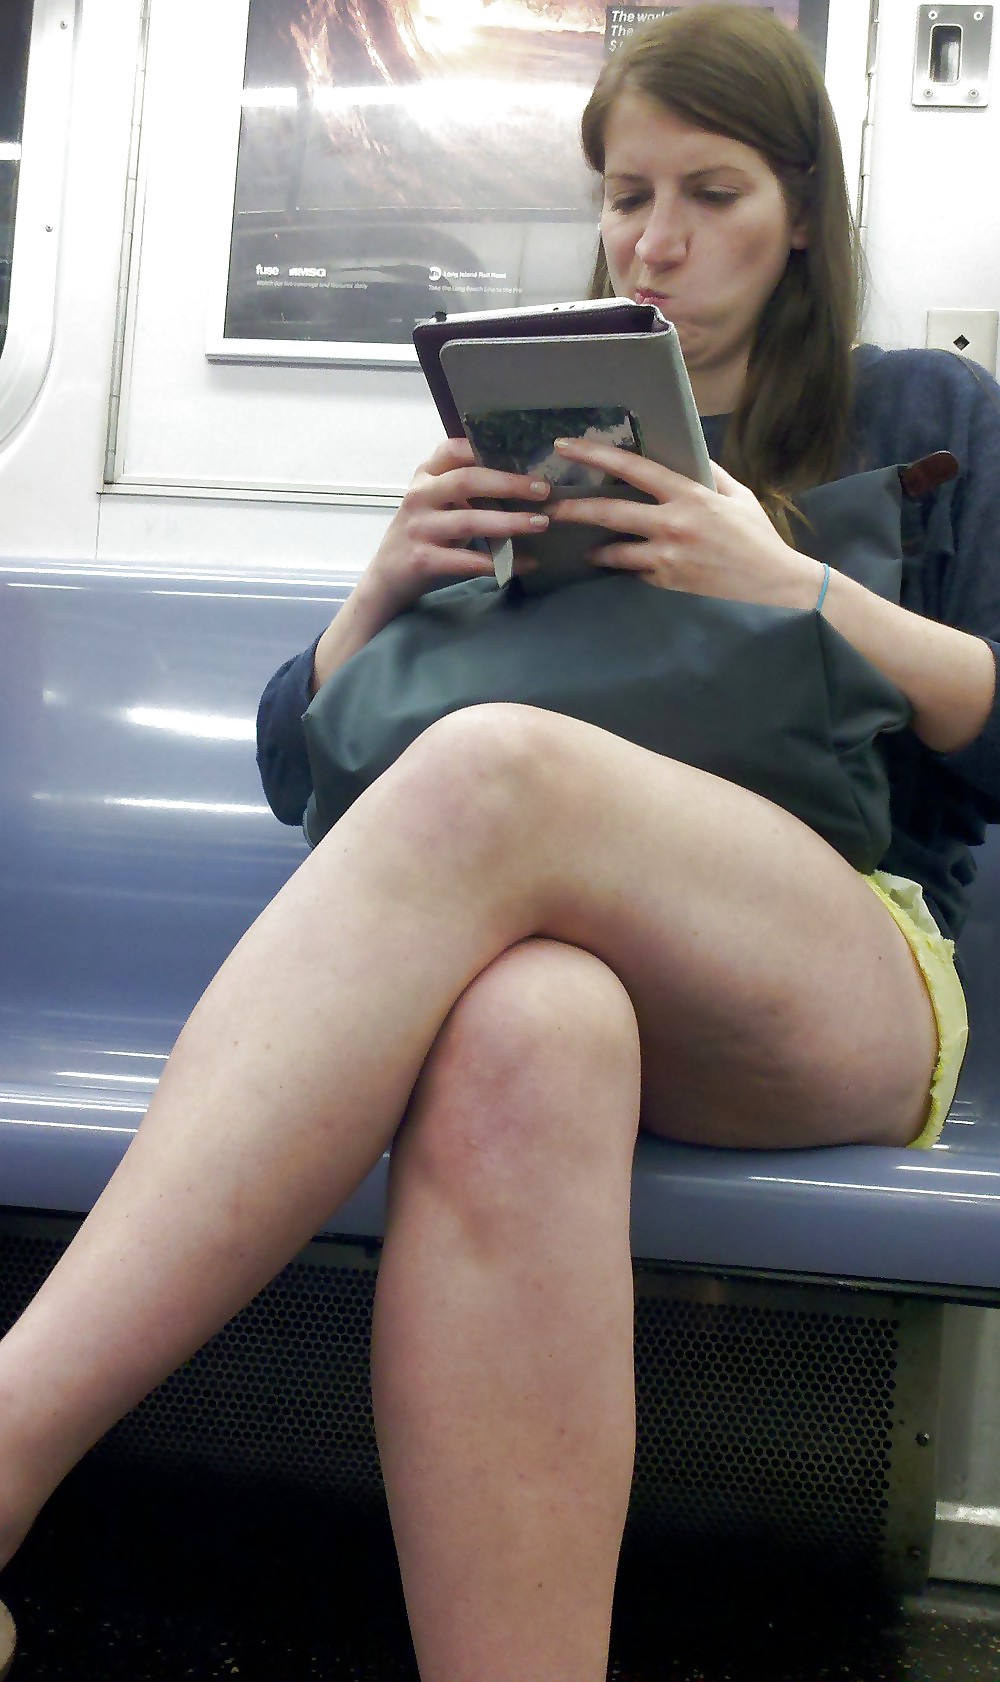 New York Subway Girls Compilation 1 - Legs and Thighs #6590201